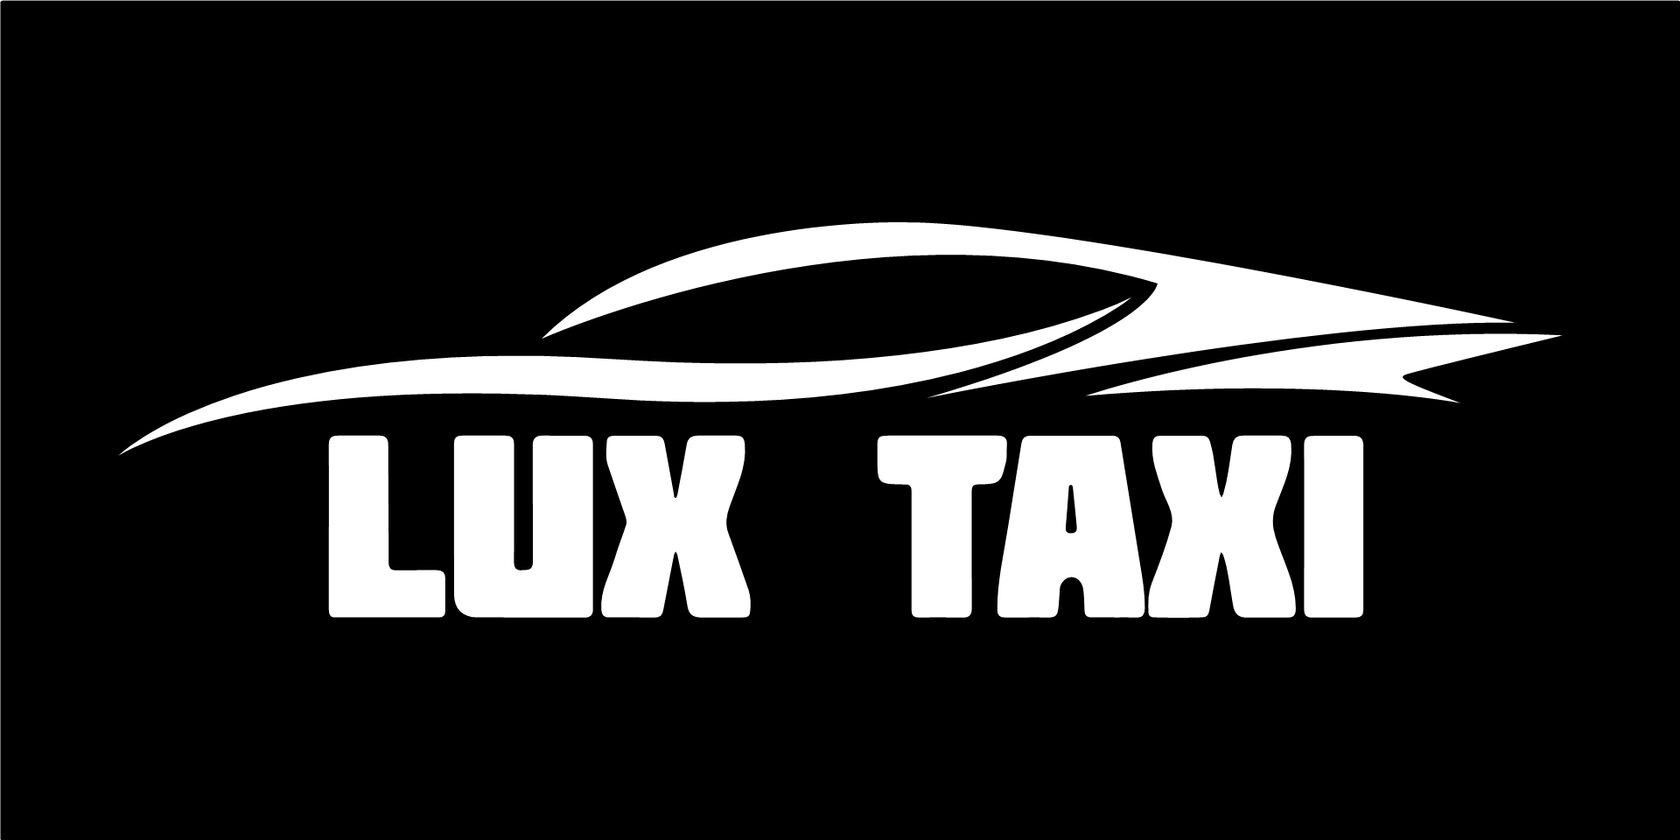 LUX TAXI